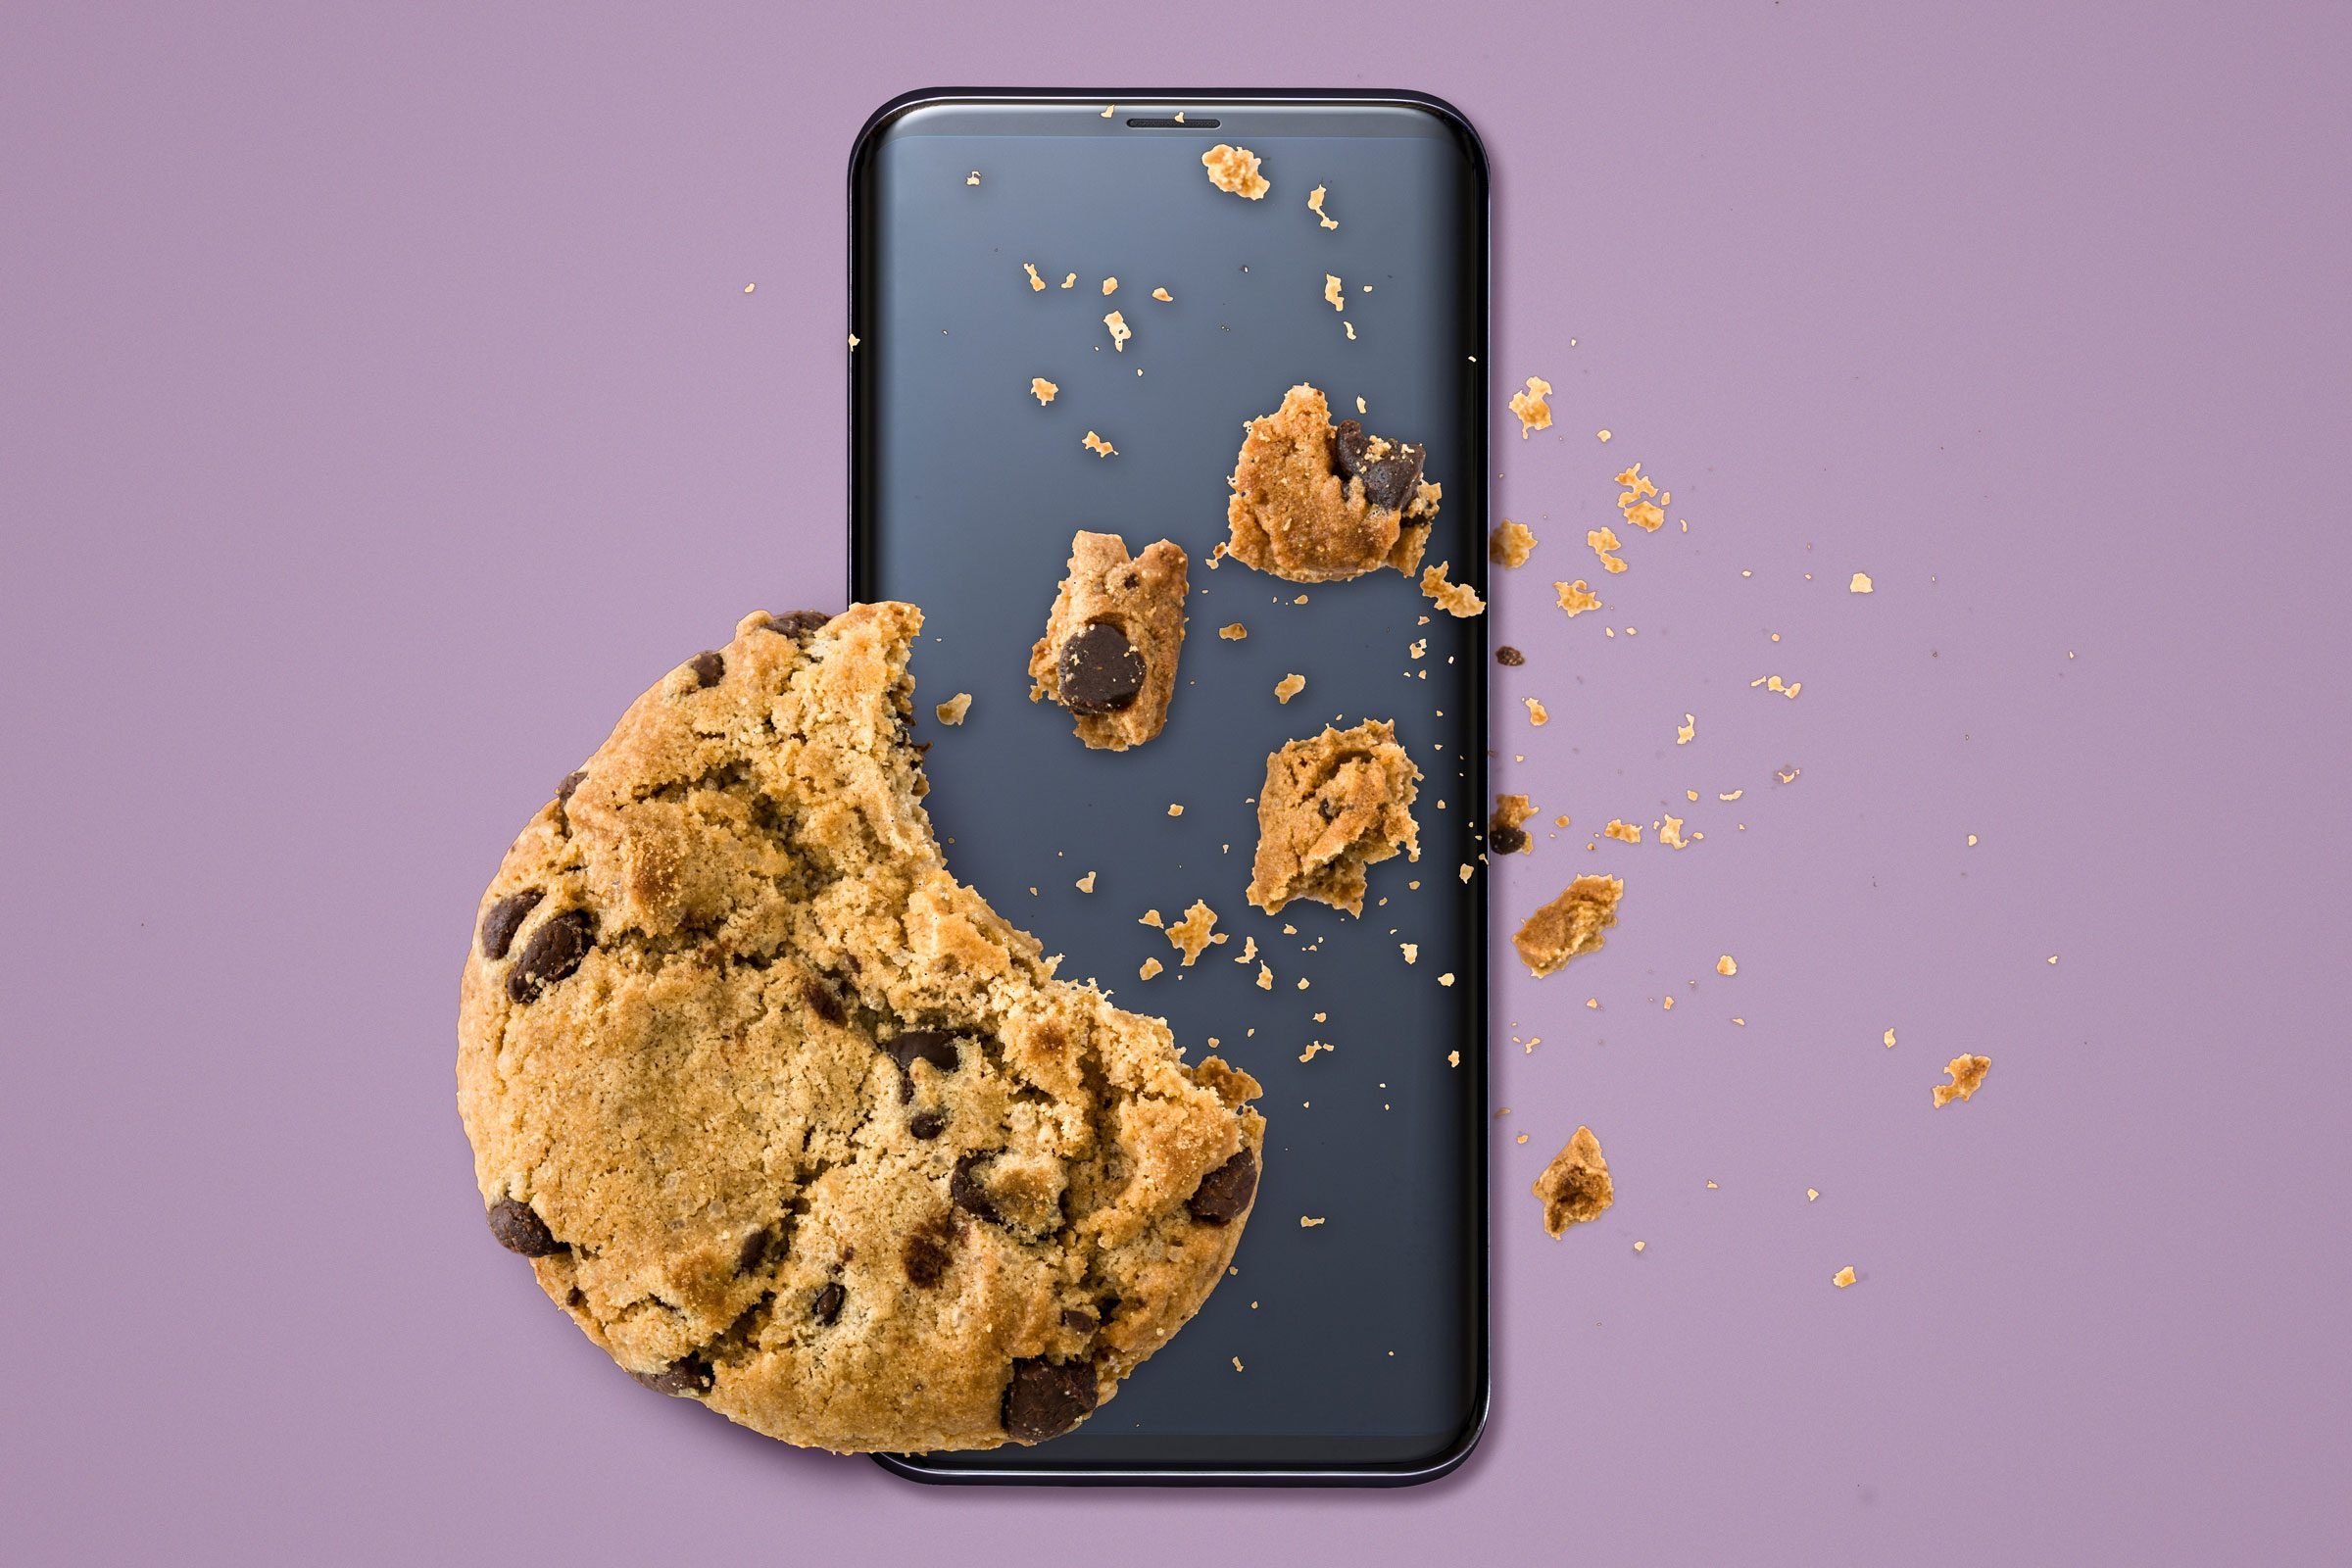 Cookies in Context. One Reason Cookie Clicker May Have…